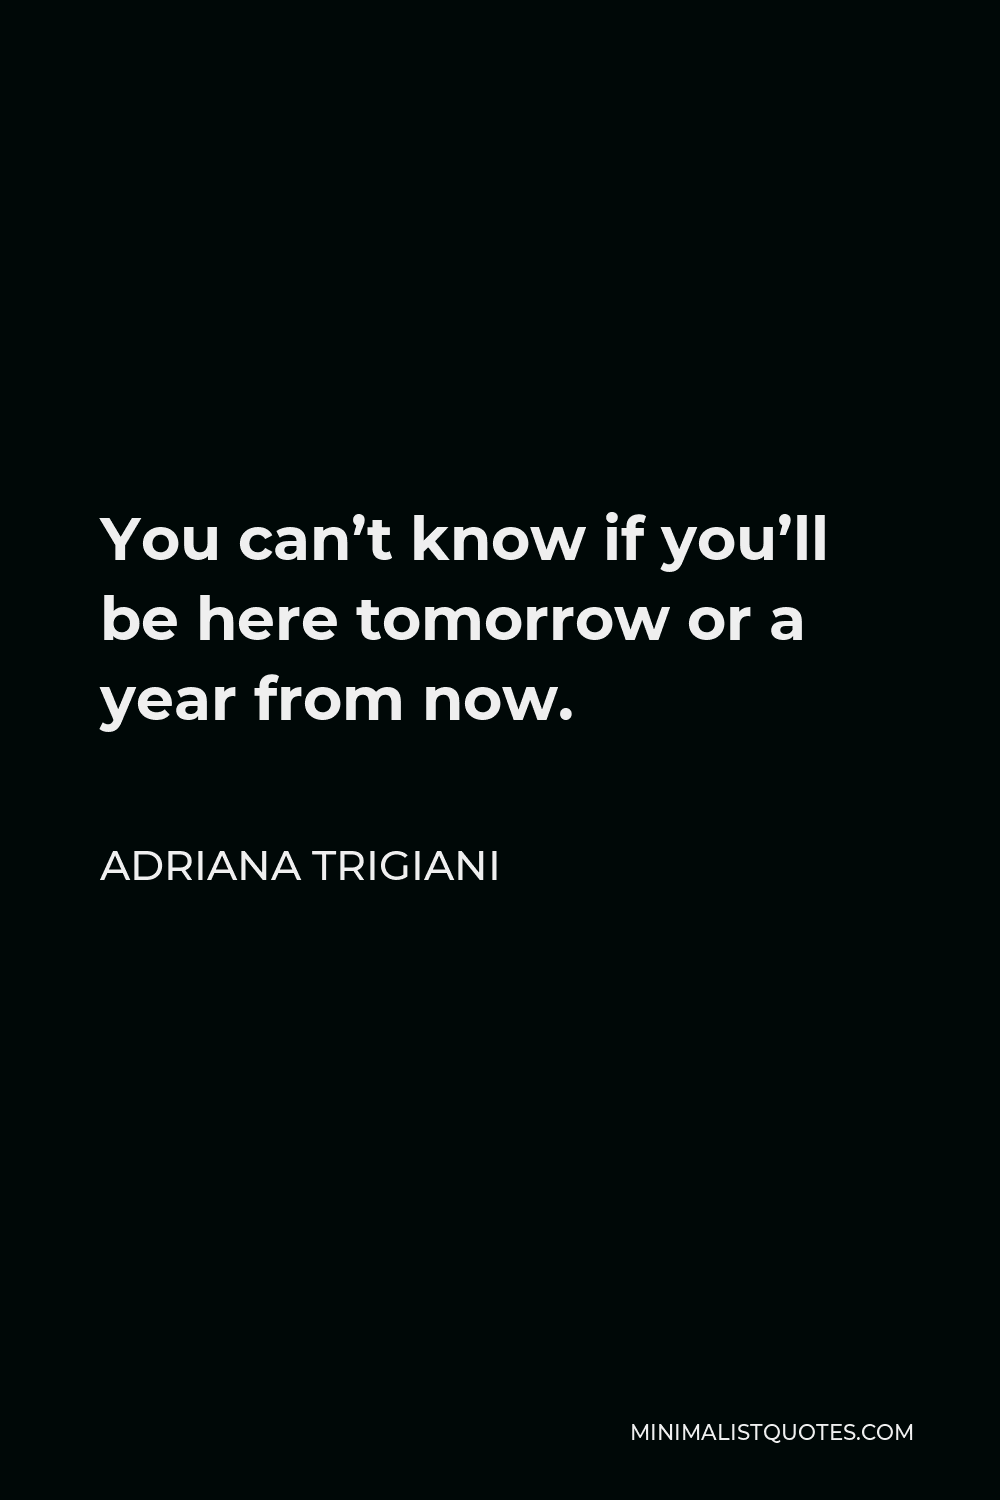 Adriana Trigiani Quote - You can’t know if you’ll be here tomorrow or a year from now.